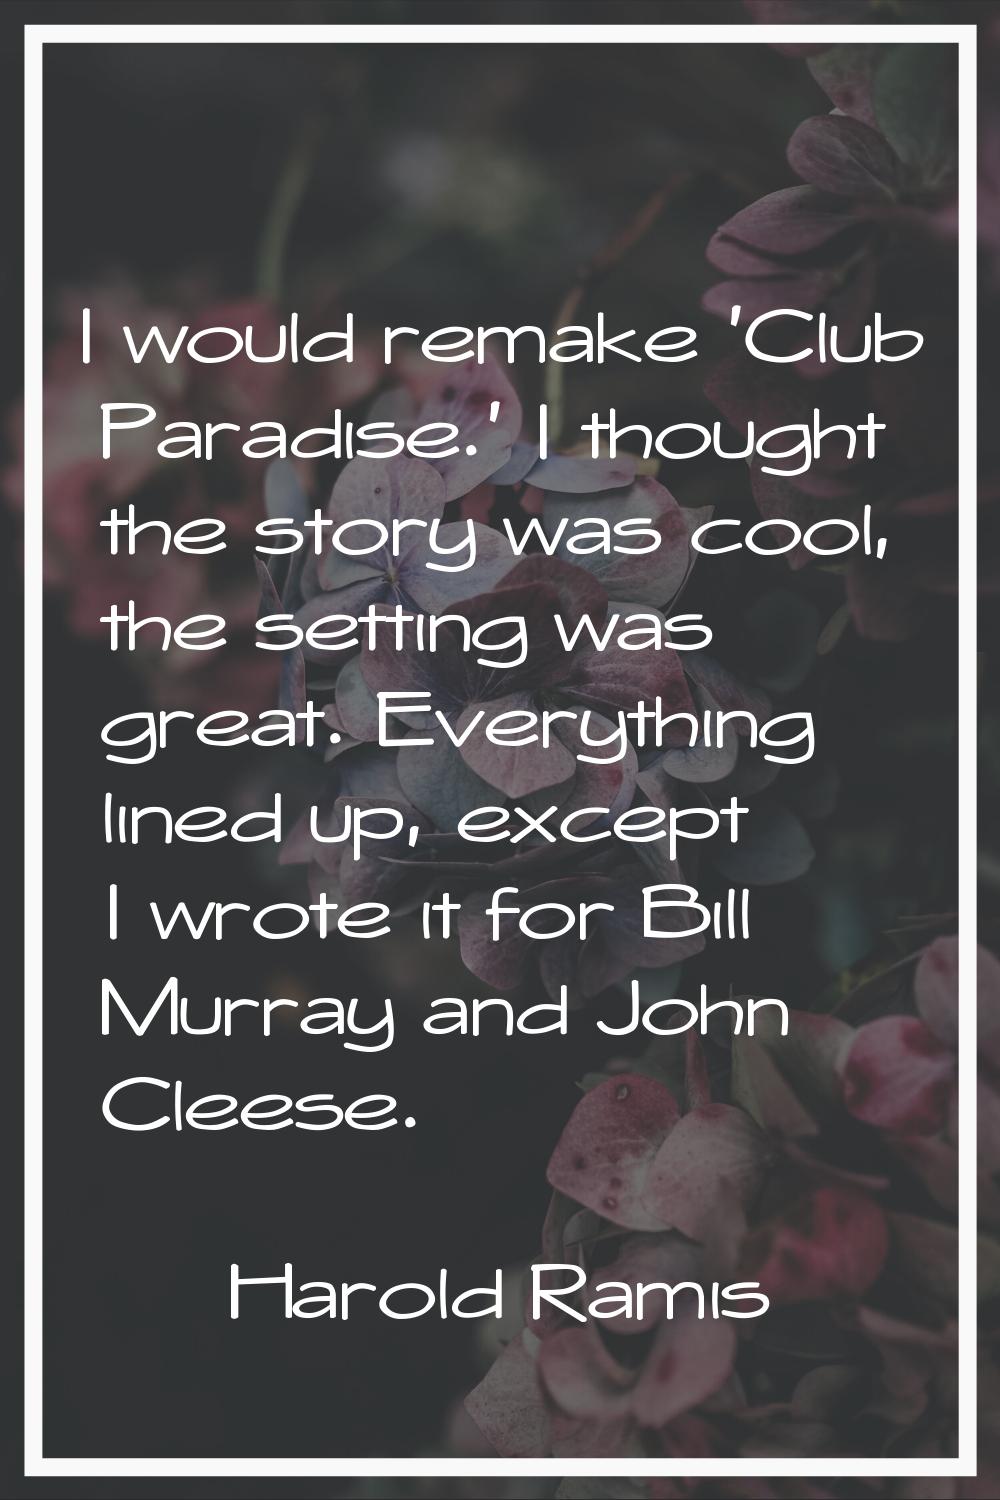 I would remake 'Club Paradise.' I thought the story was cool, the setting was great. Everything lin